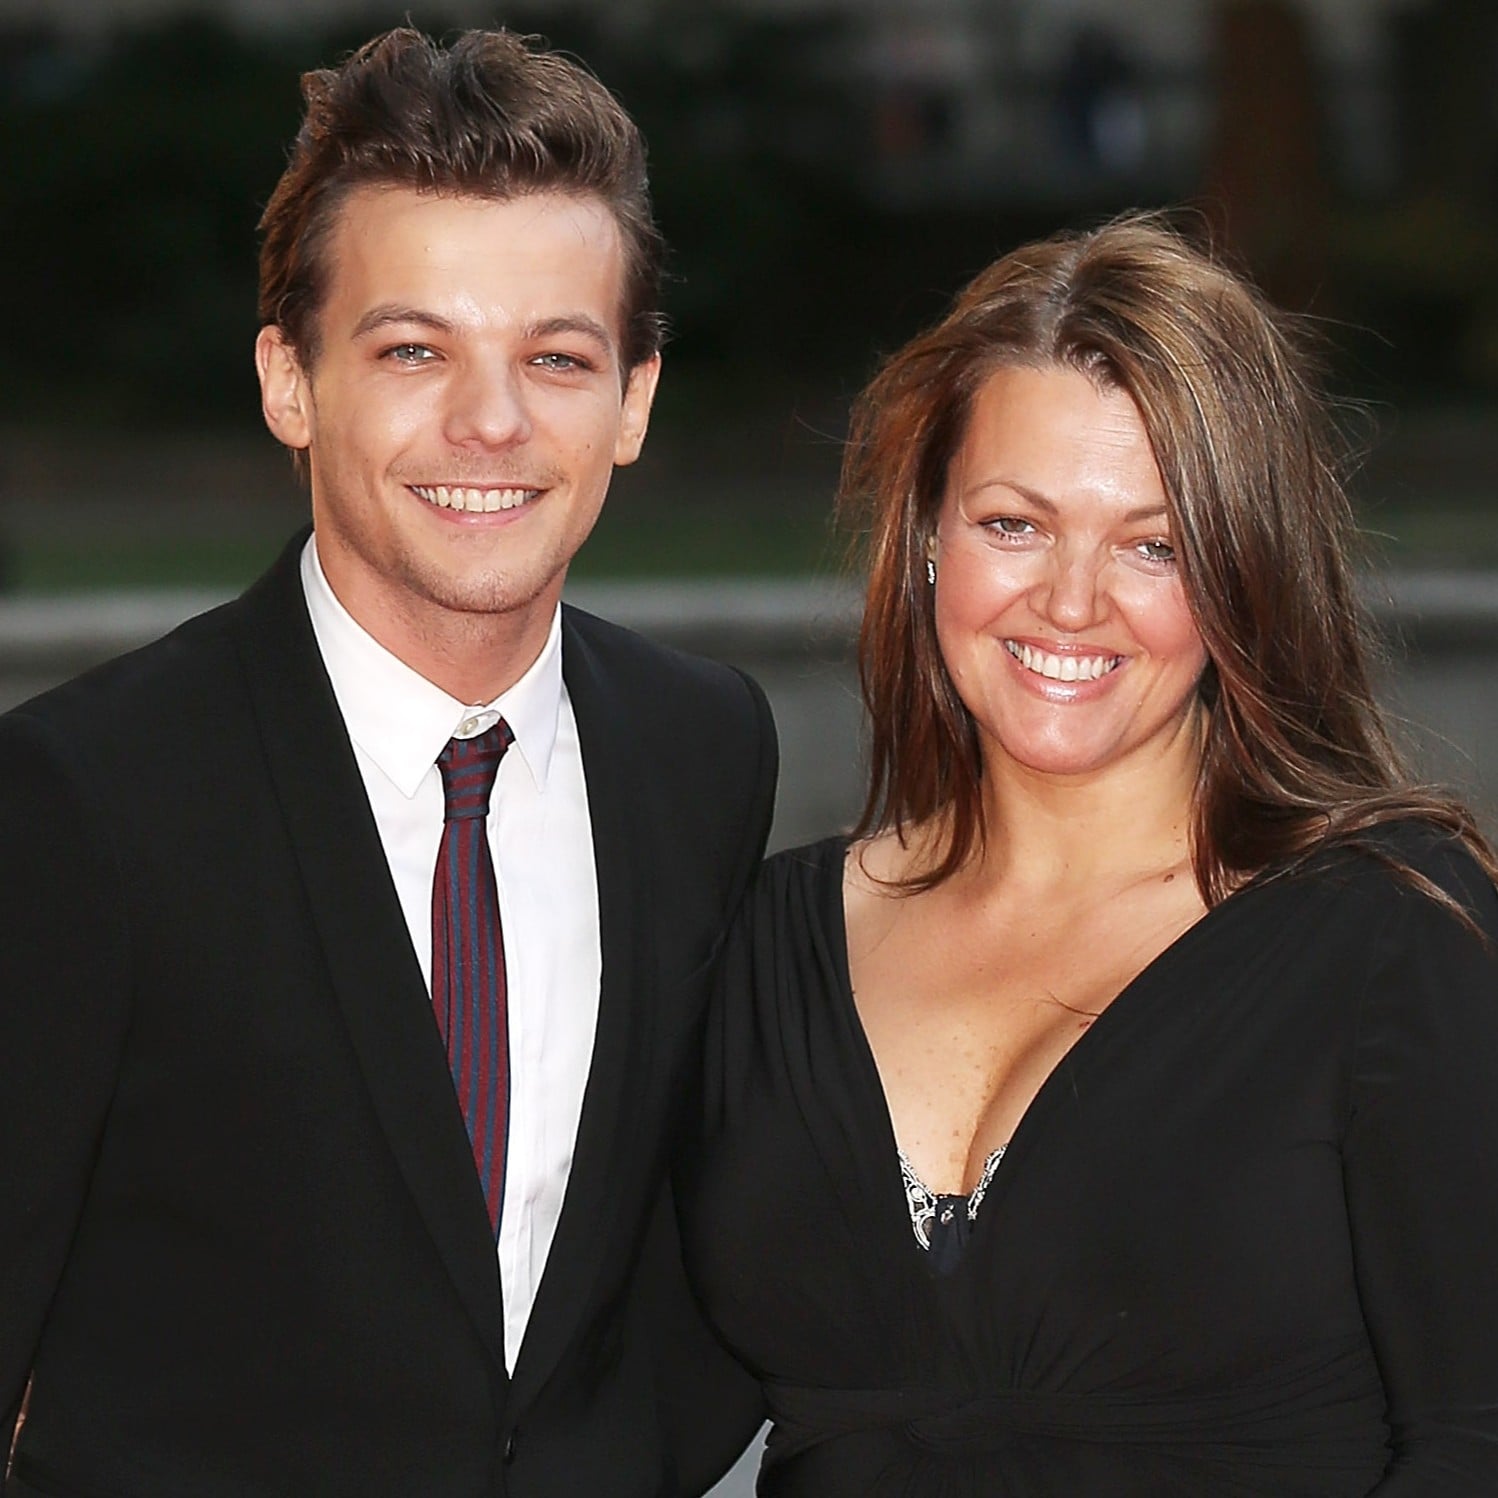 See Louis Tomlinson Pay Tribute to His Mother in 'Two of Us' Video